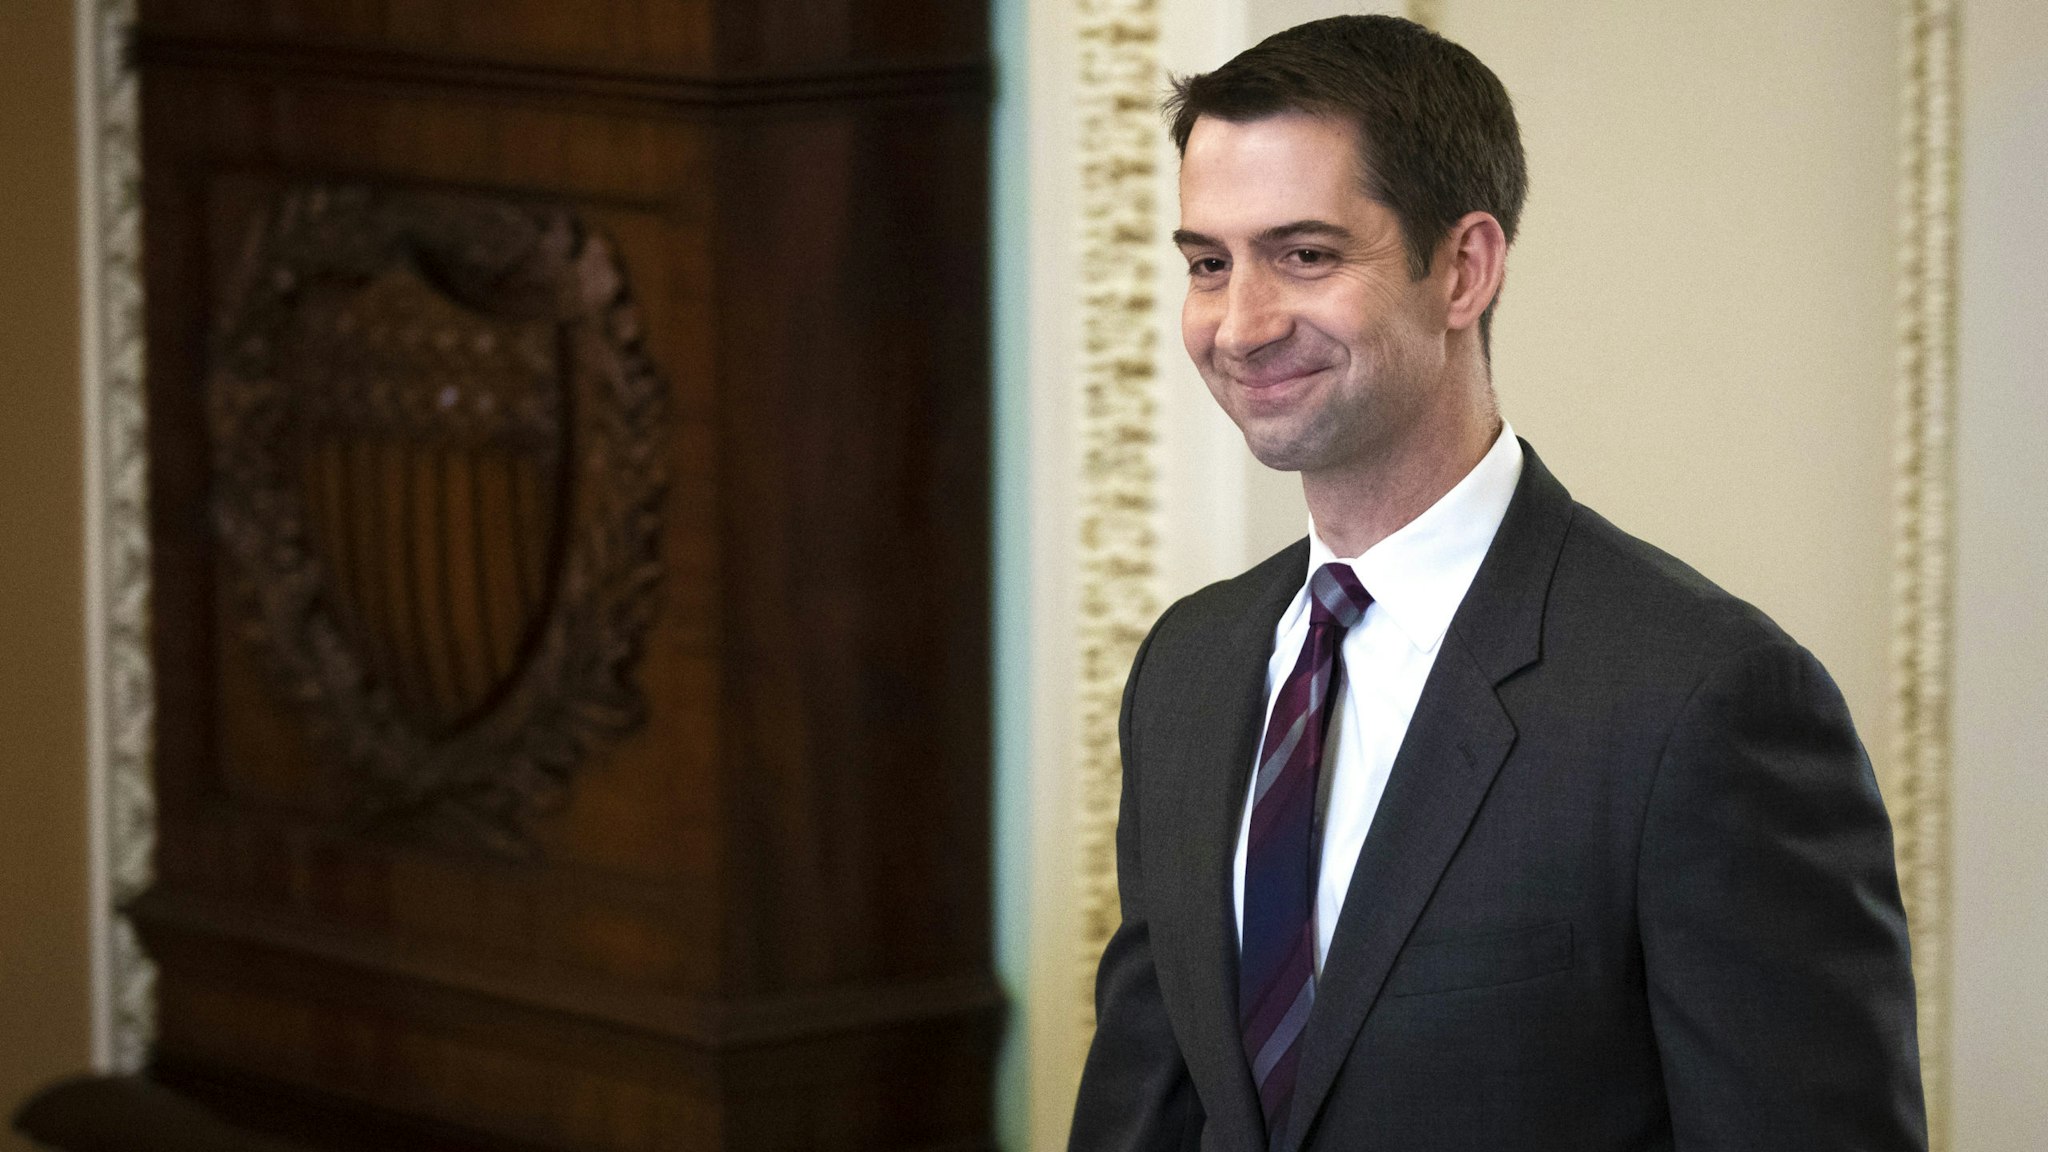 WASHINGTON, DC - JANUARY 21: Sen. Tom Cotton (R-AR) walks to the Senate floor for the start of impeachment trial proceedings at the U.S. Capitol on January 21, 2020 in Washington, DC. The Senate impeachment trial of U.S. President Donald Trump resumes on Tuesday.